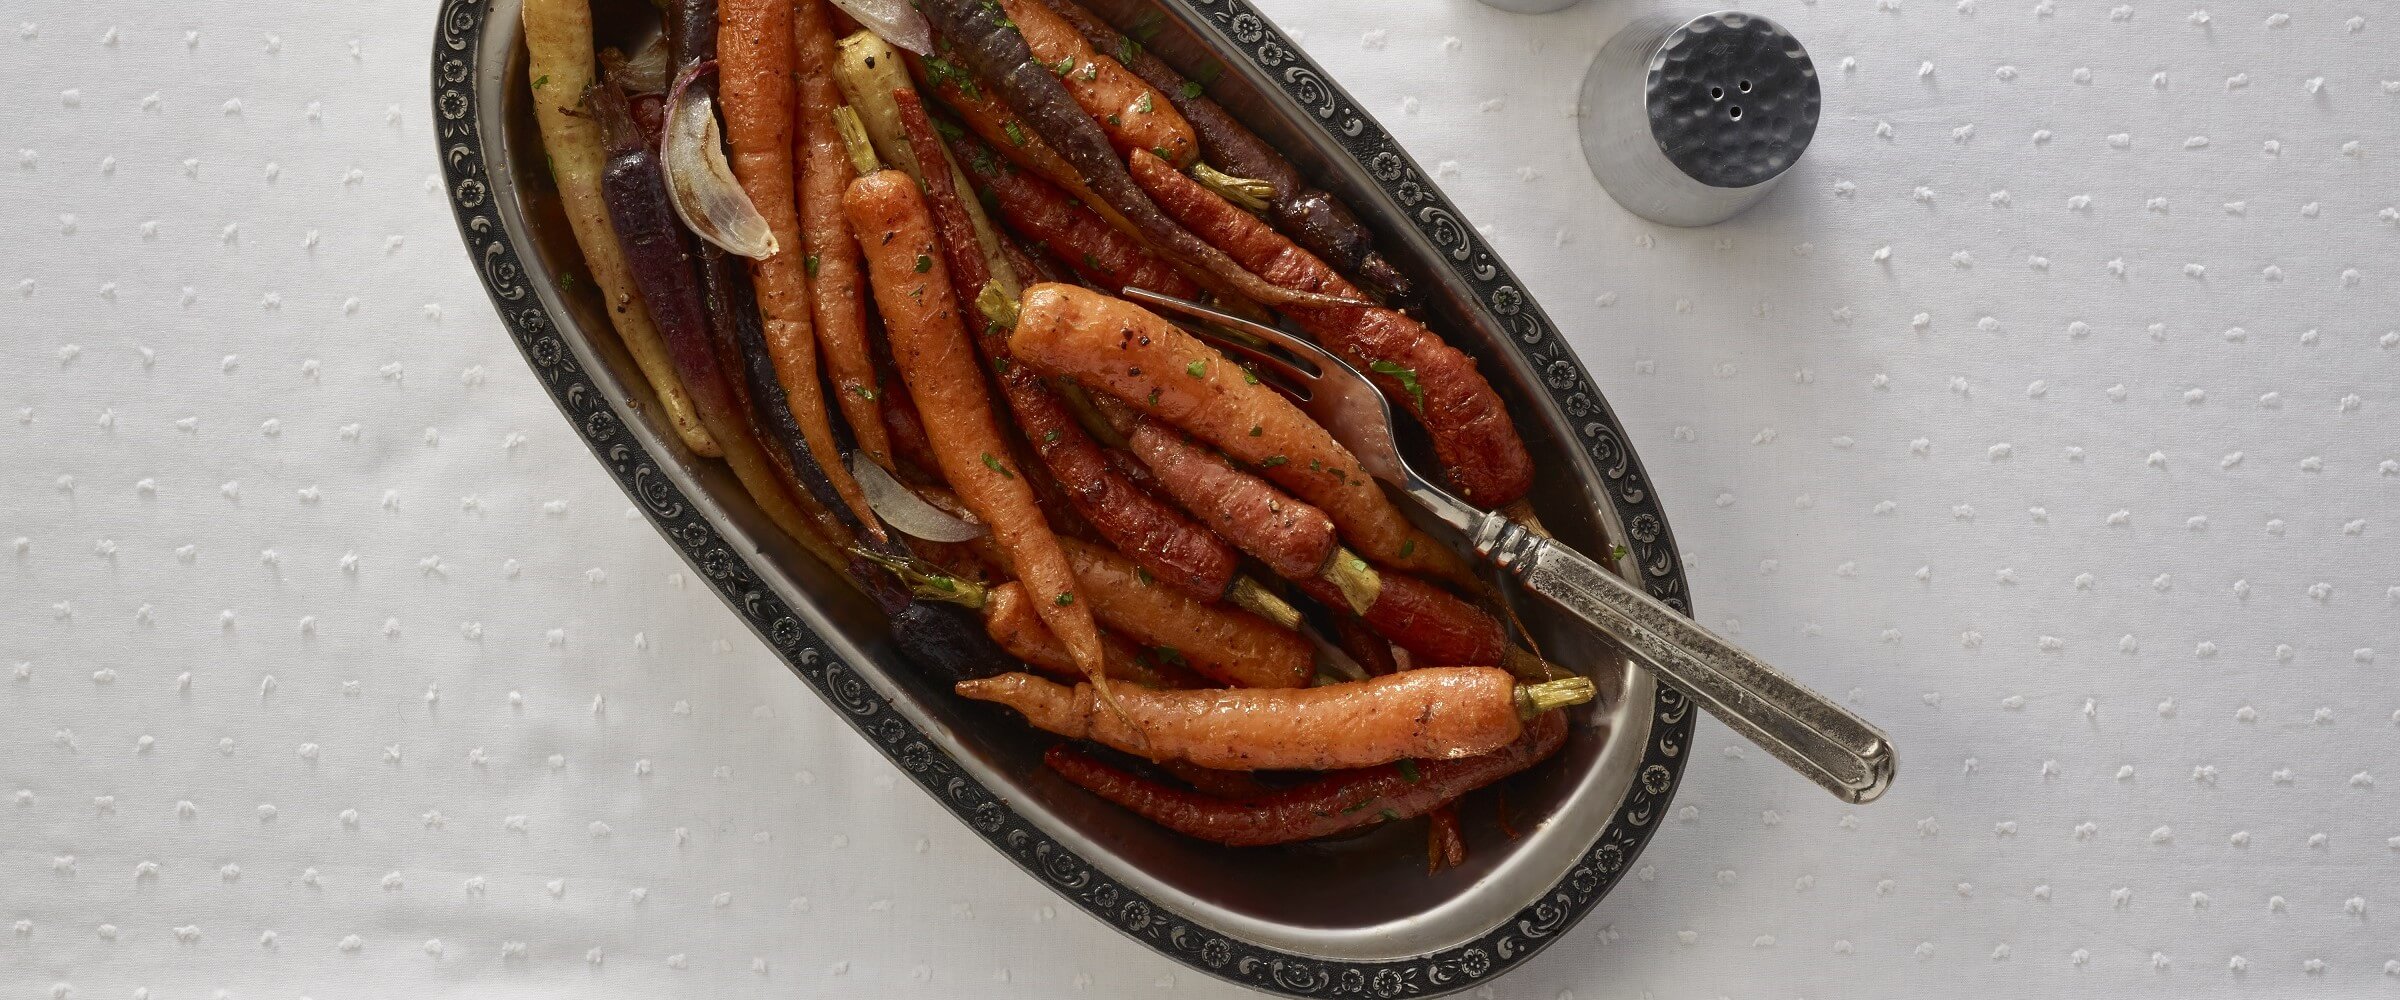 maple dijon roasted carrots in dish with serving fork